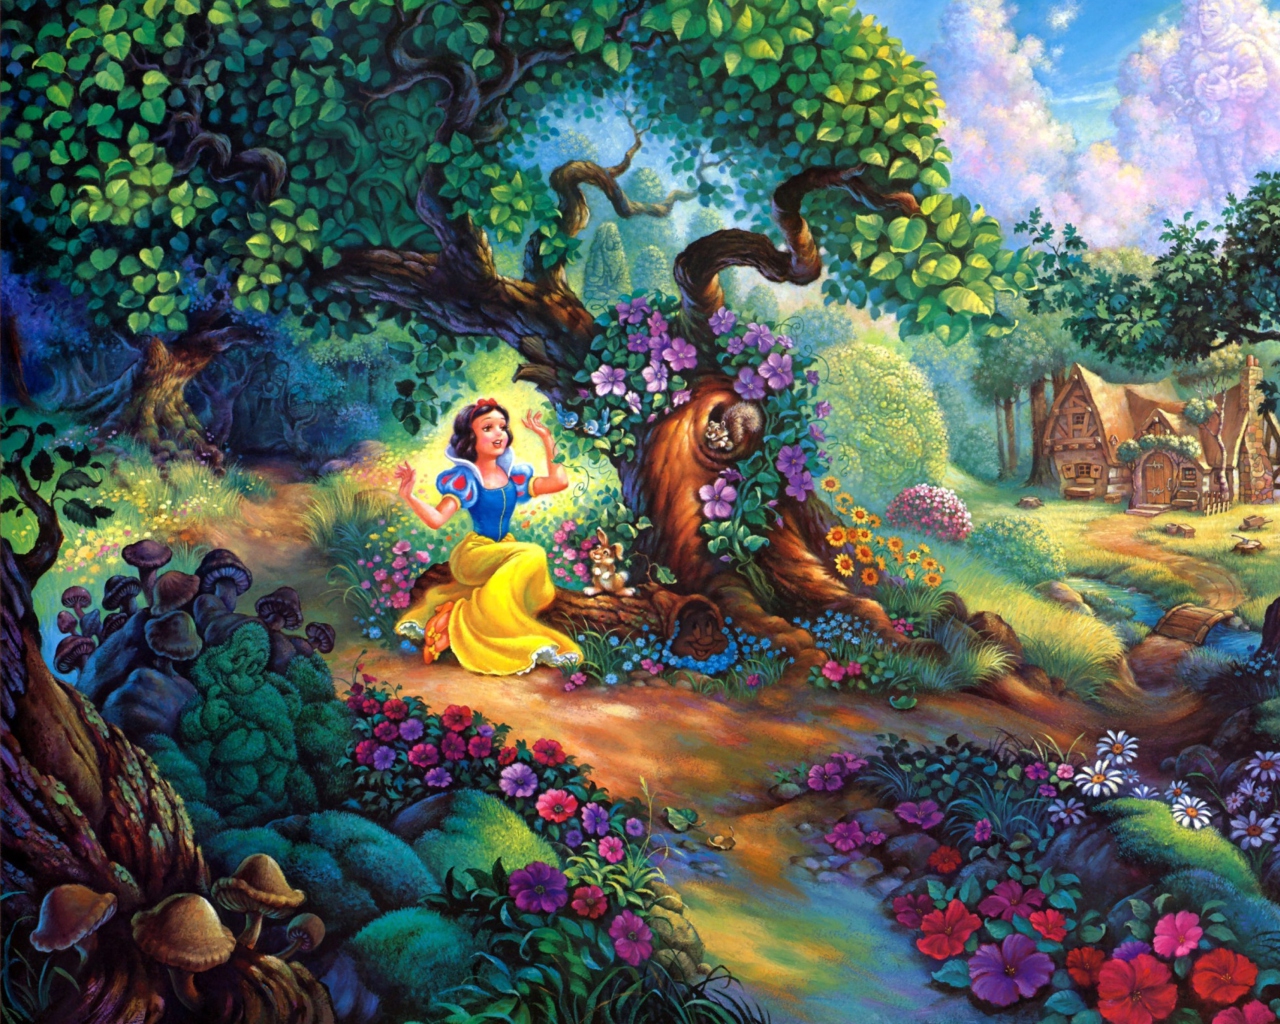 Das Snow White In Magical Forest Wallpaper 1280x1024